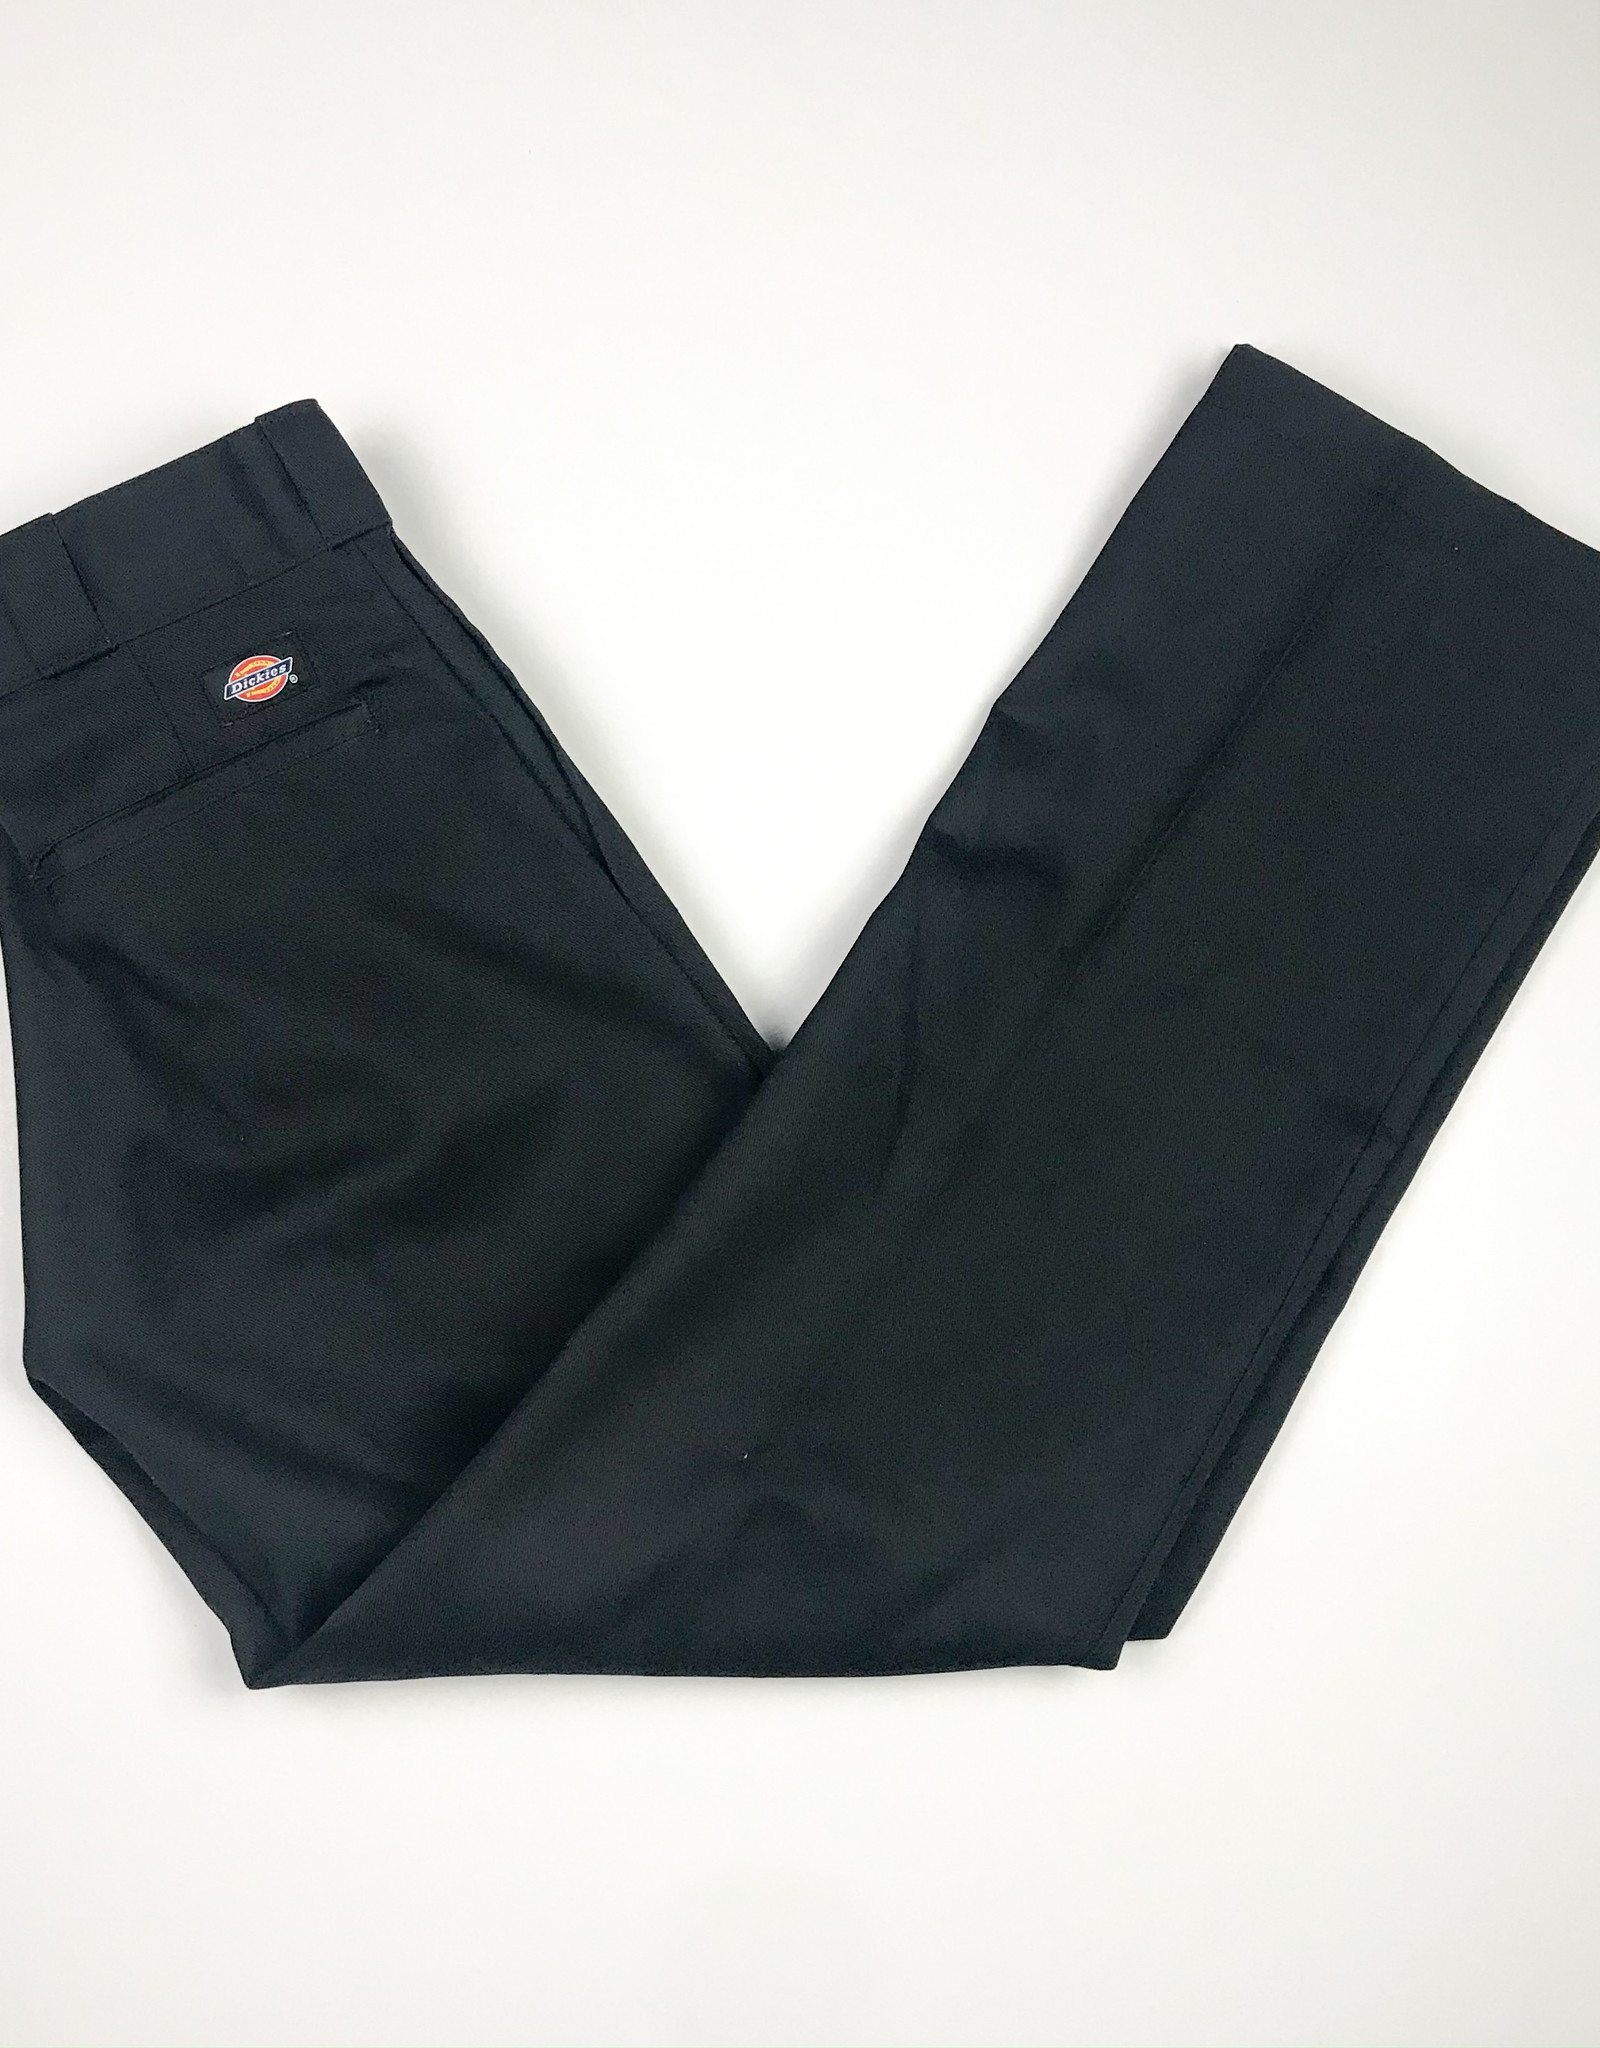 CLASSIC INDUSTRIAL WORK PANTS 6 COLORS 